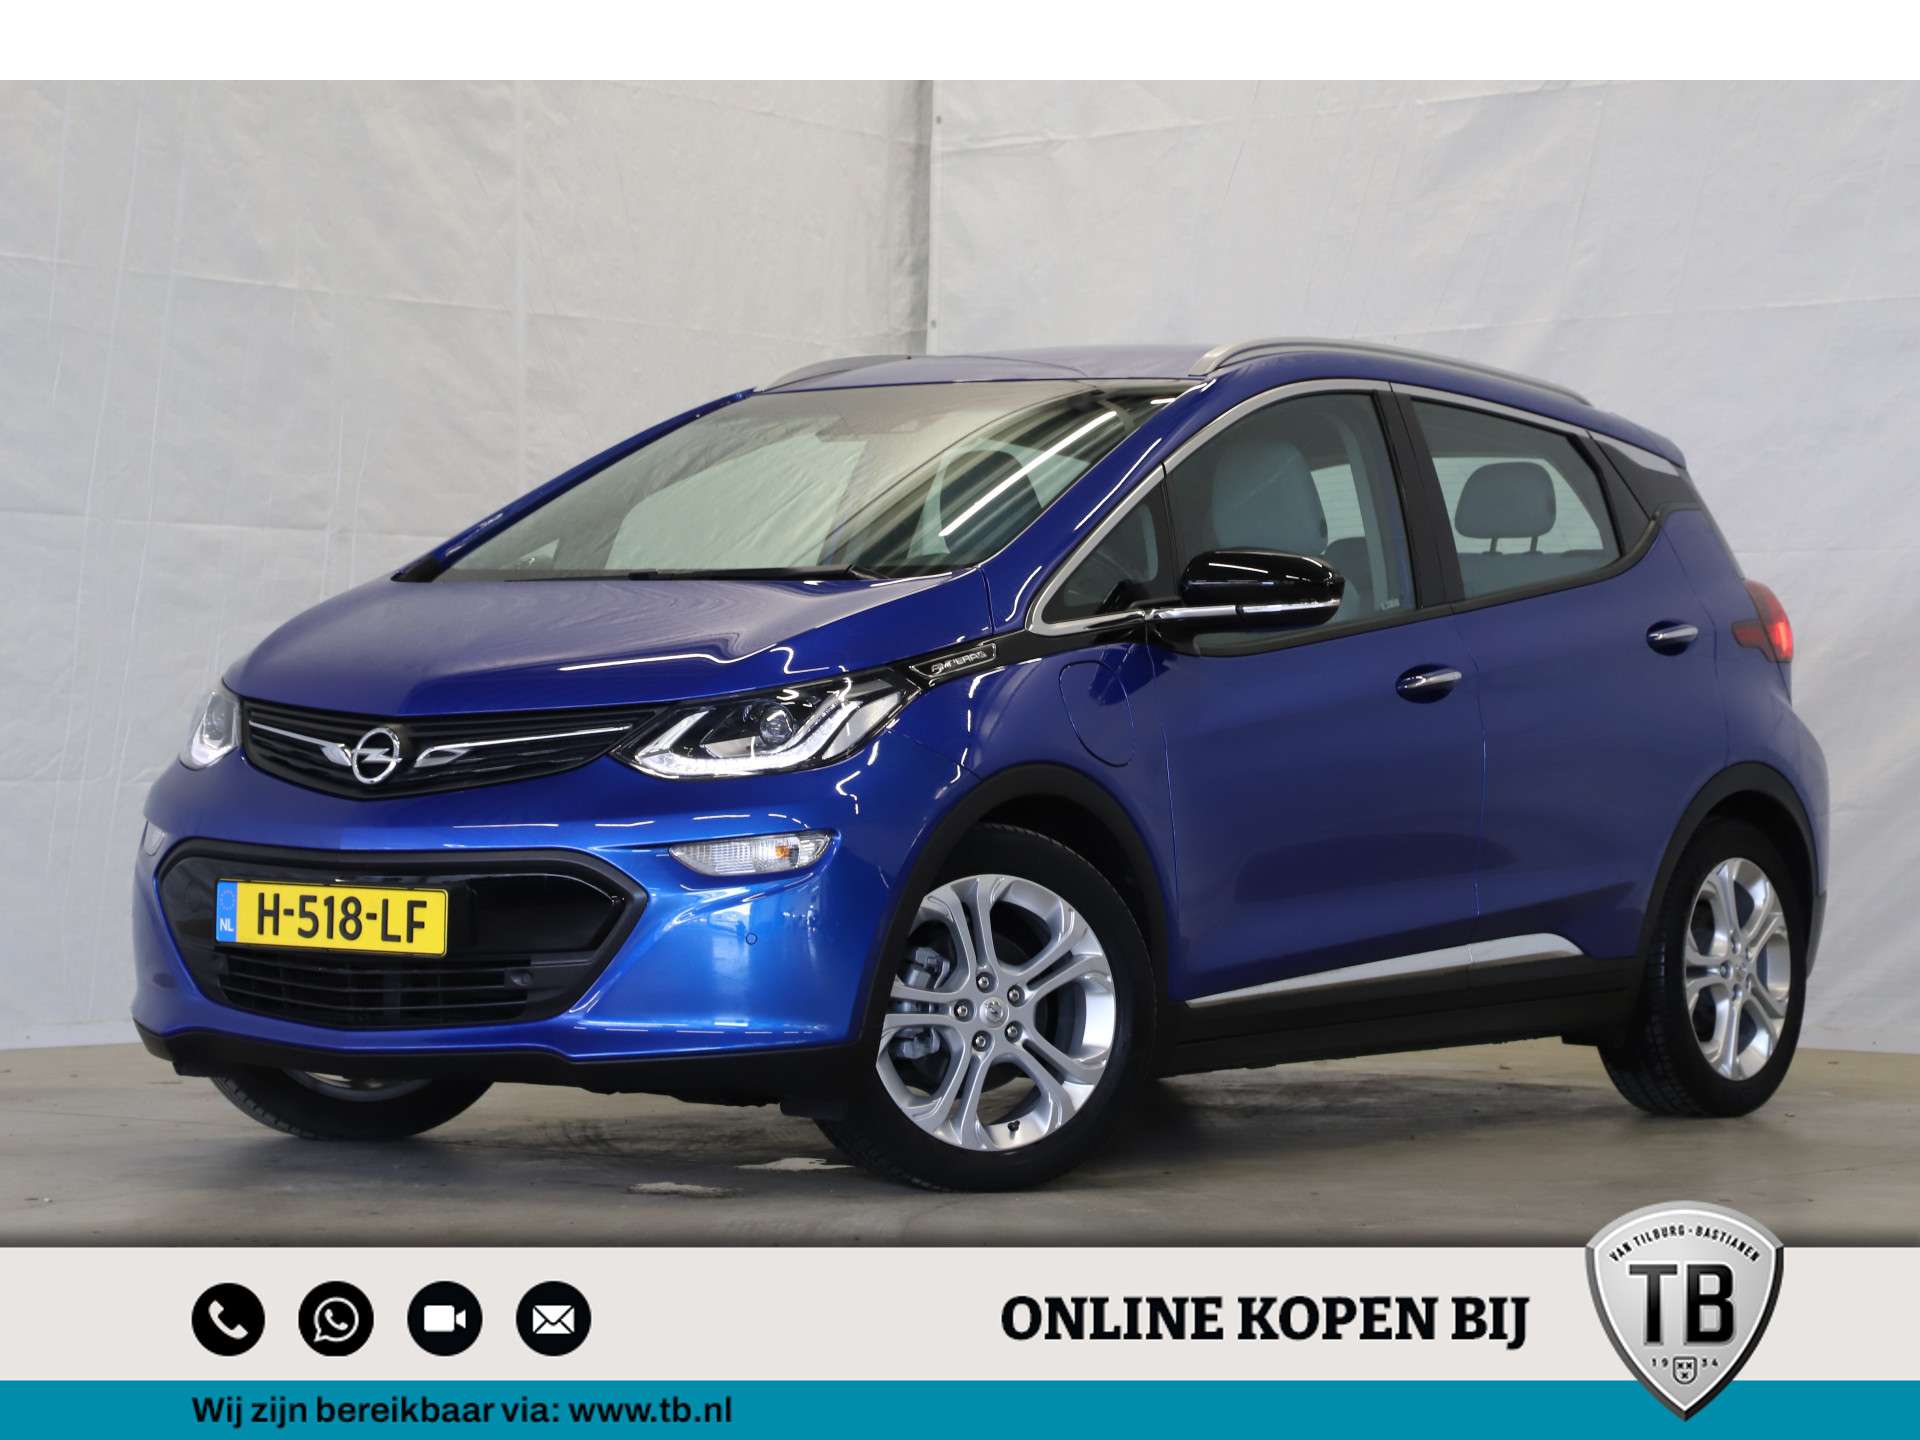 Opel Ampera-E Compact in Blue used in ROOSENDAAL for € 24,940.-